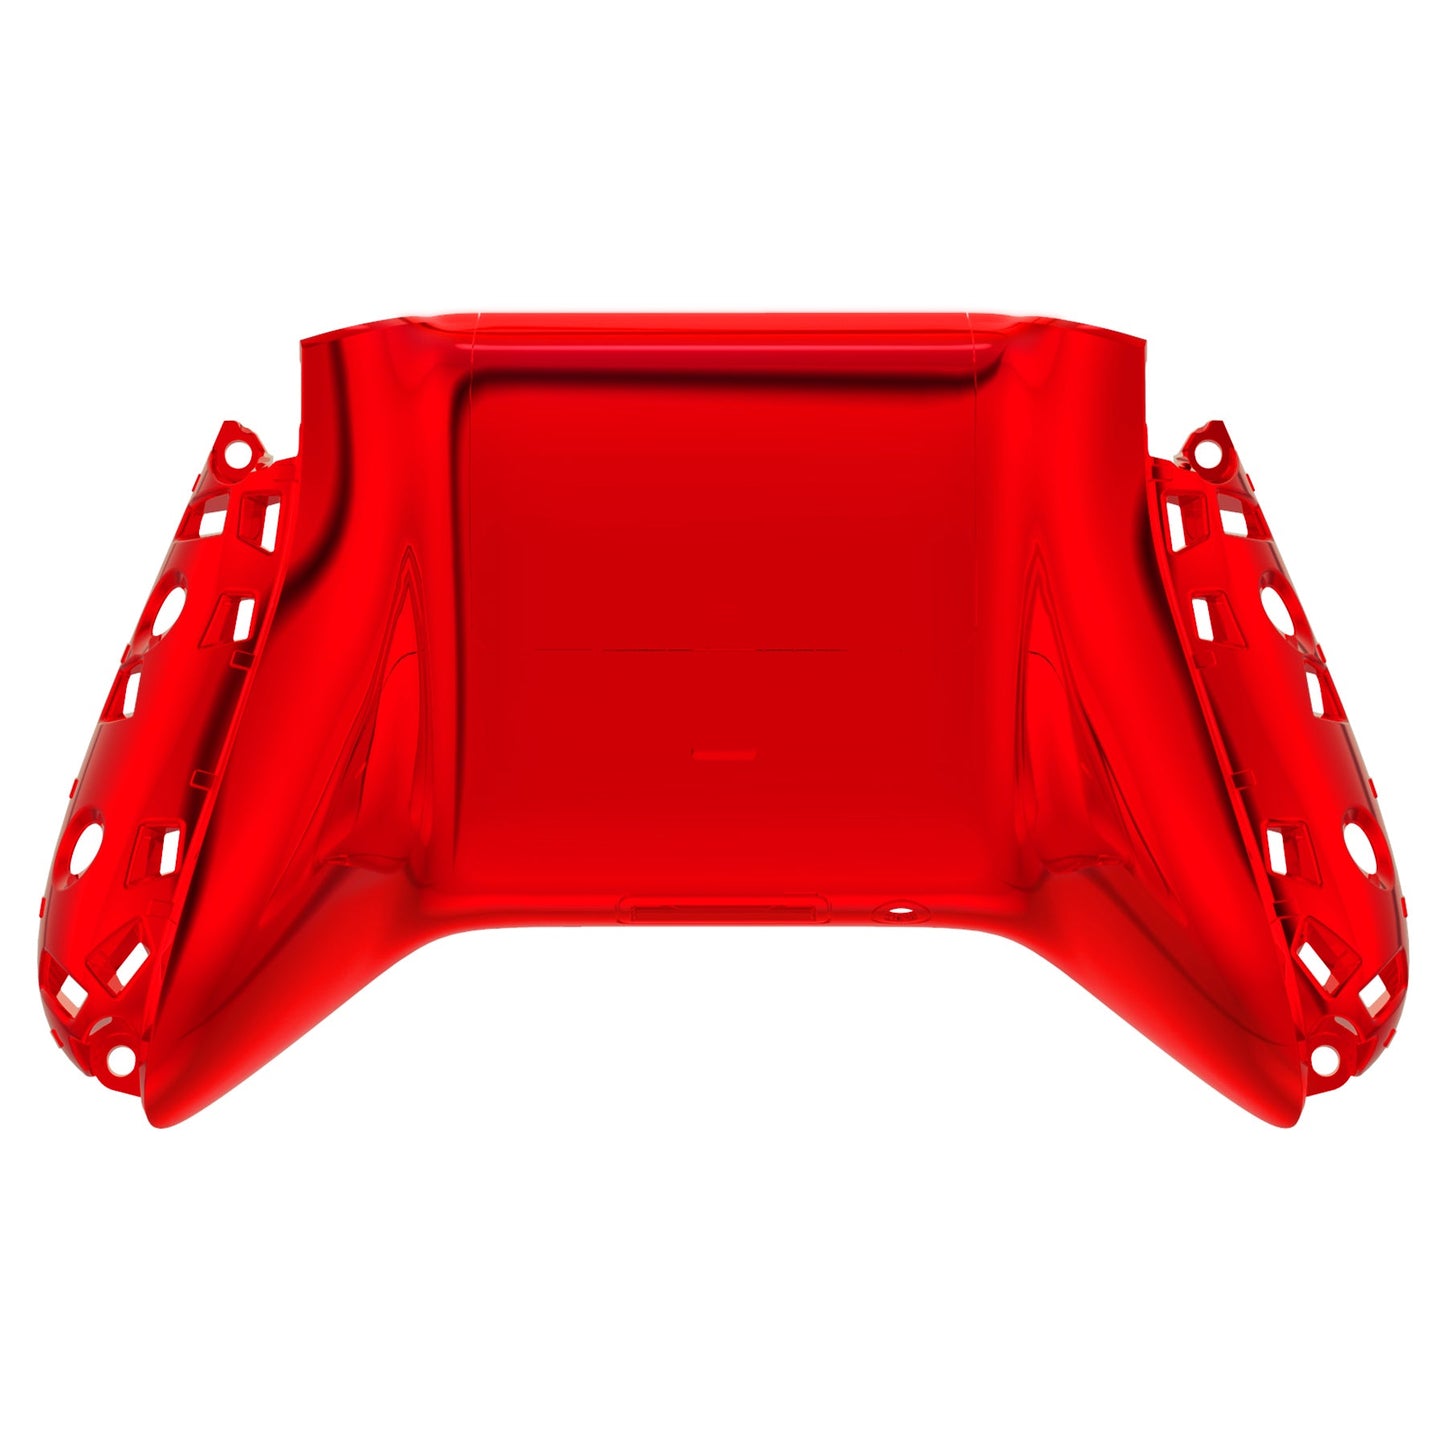 eXtremeRate Retail Chrome Red Glossy Custom Bottom Shell with Battery Cover for Xbox Series S/X Controller, Replacement Backplate for Xbox Core Controller - Controller & Side Rails NOT Included - BX3D403